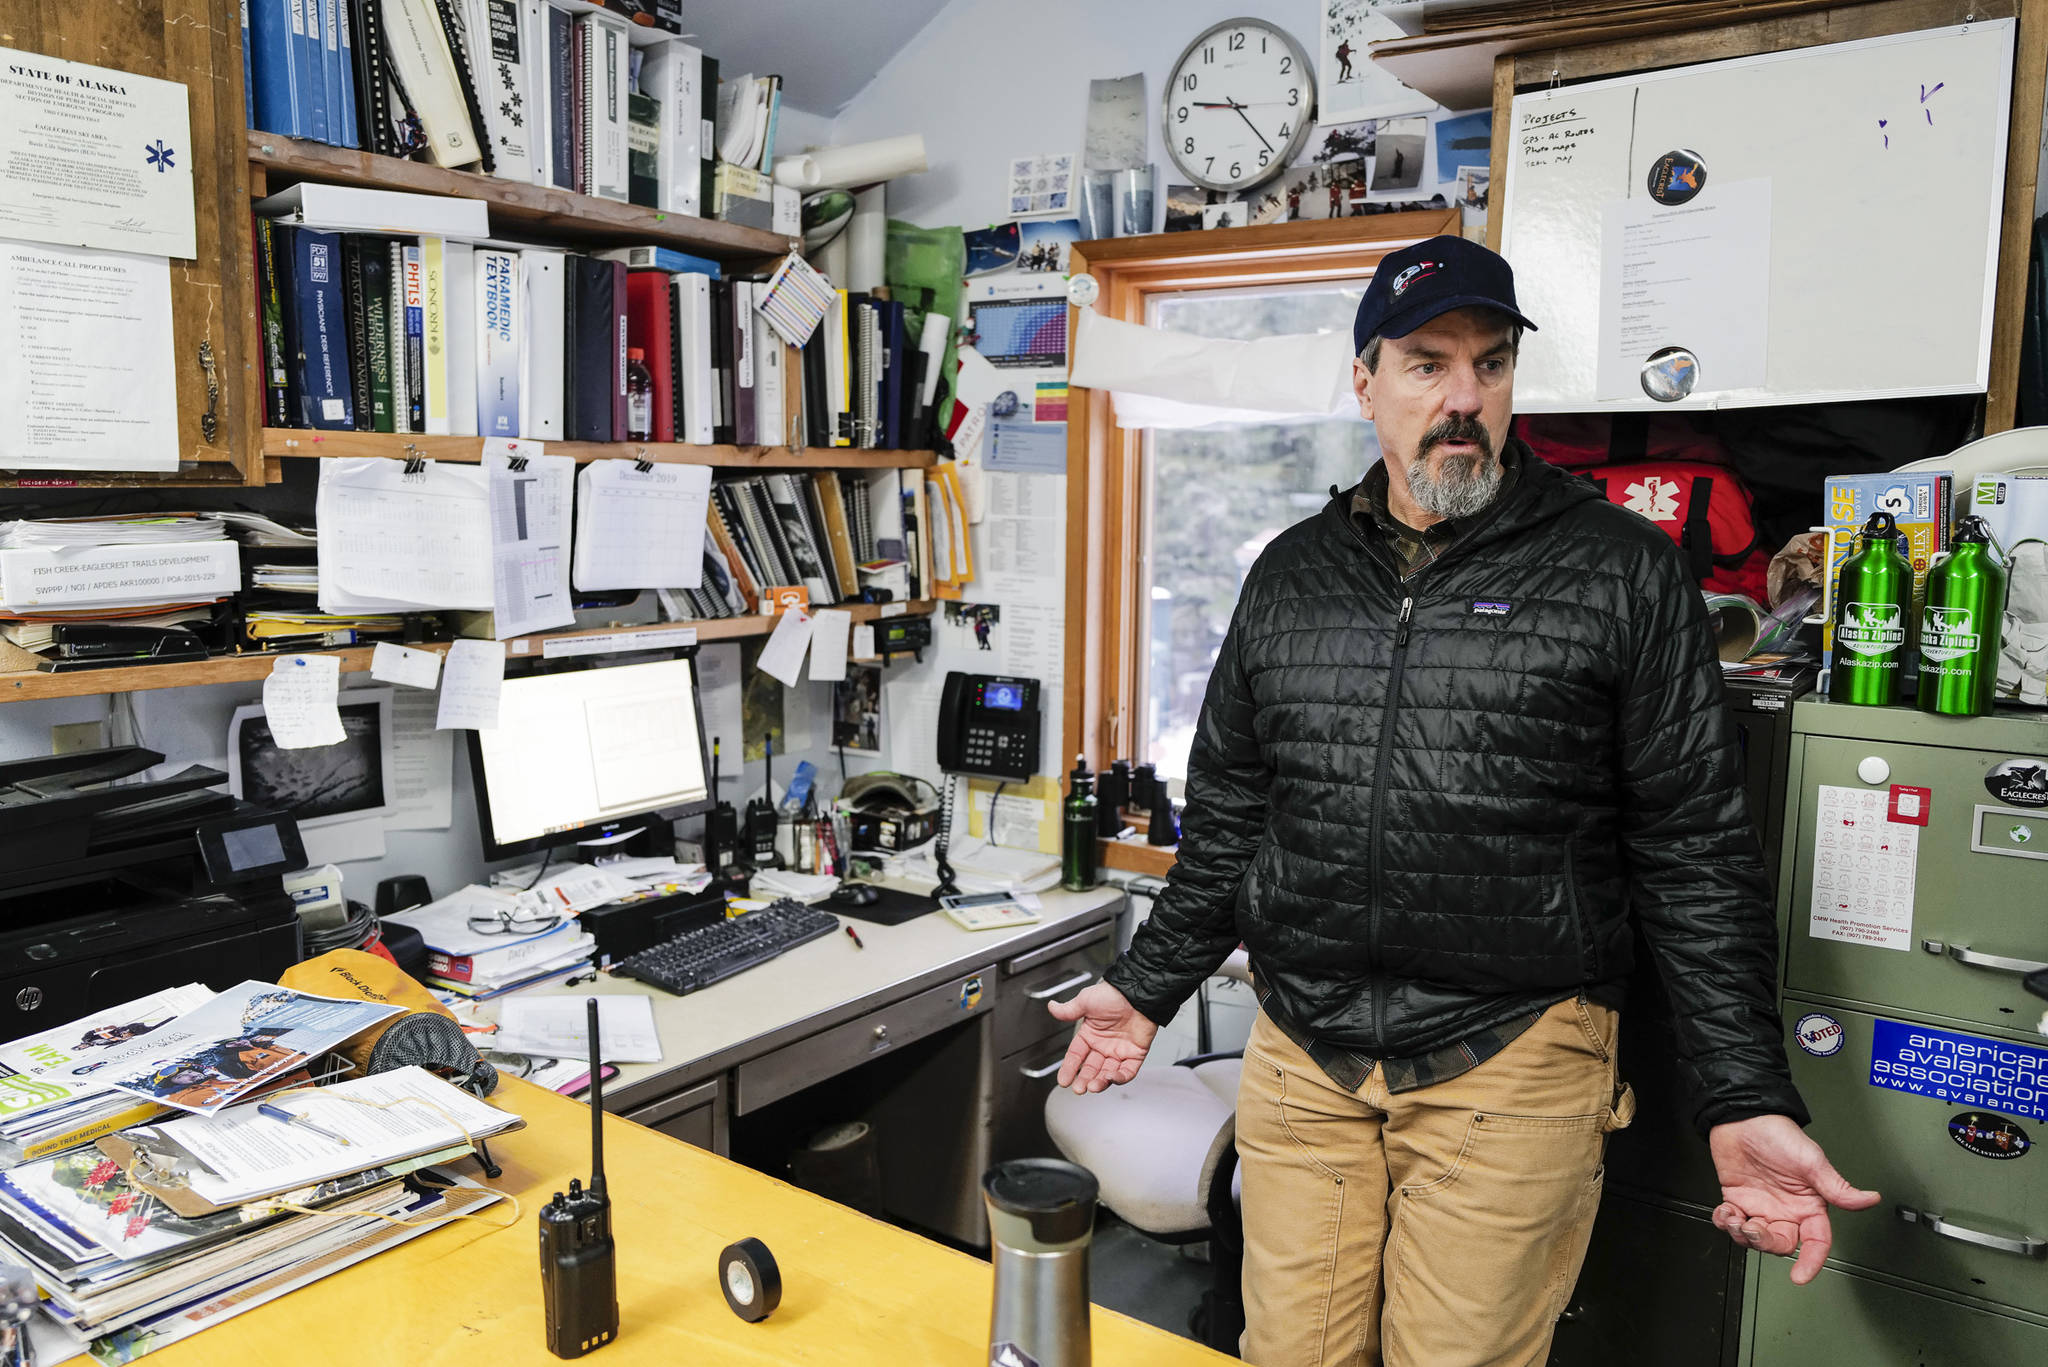 Snow Safety Director Brian Davies talks about gearing up for the season at Eaglecrest Ski Area on Thursday, Dec. 12, 2019. (Michael Penn | Juneau Empire)